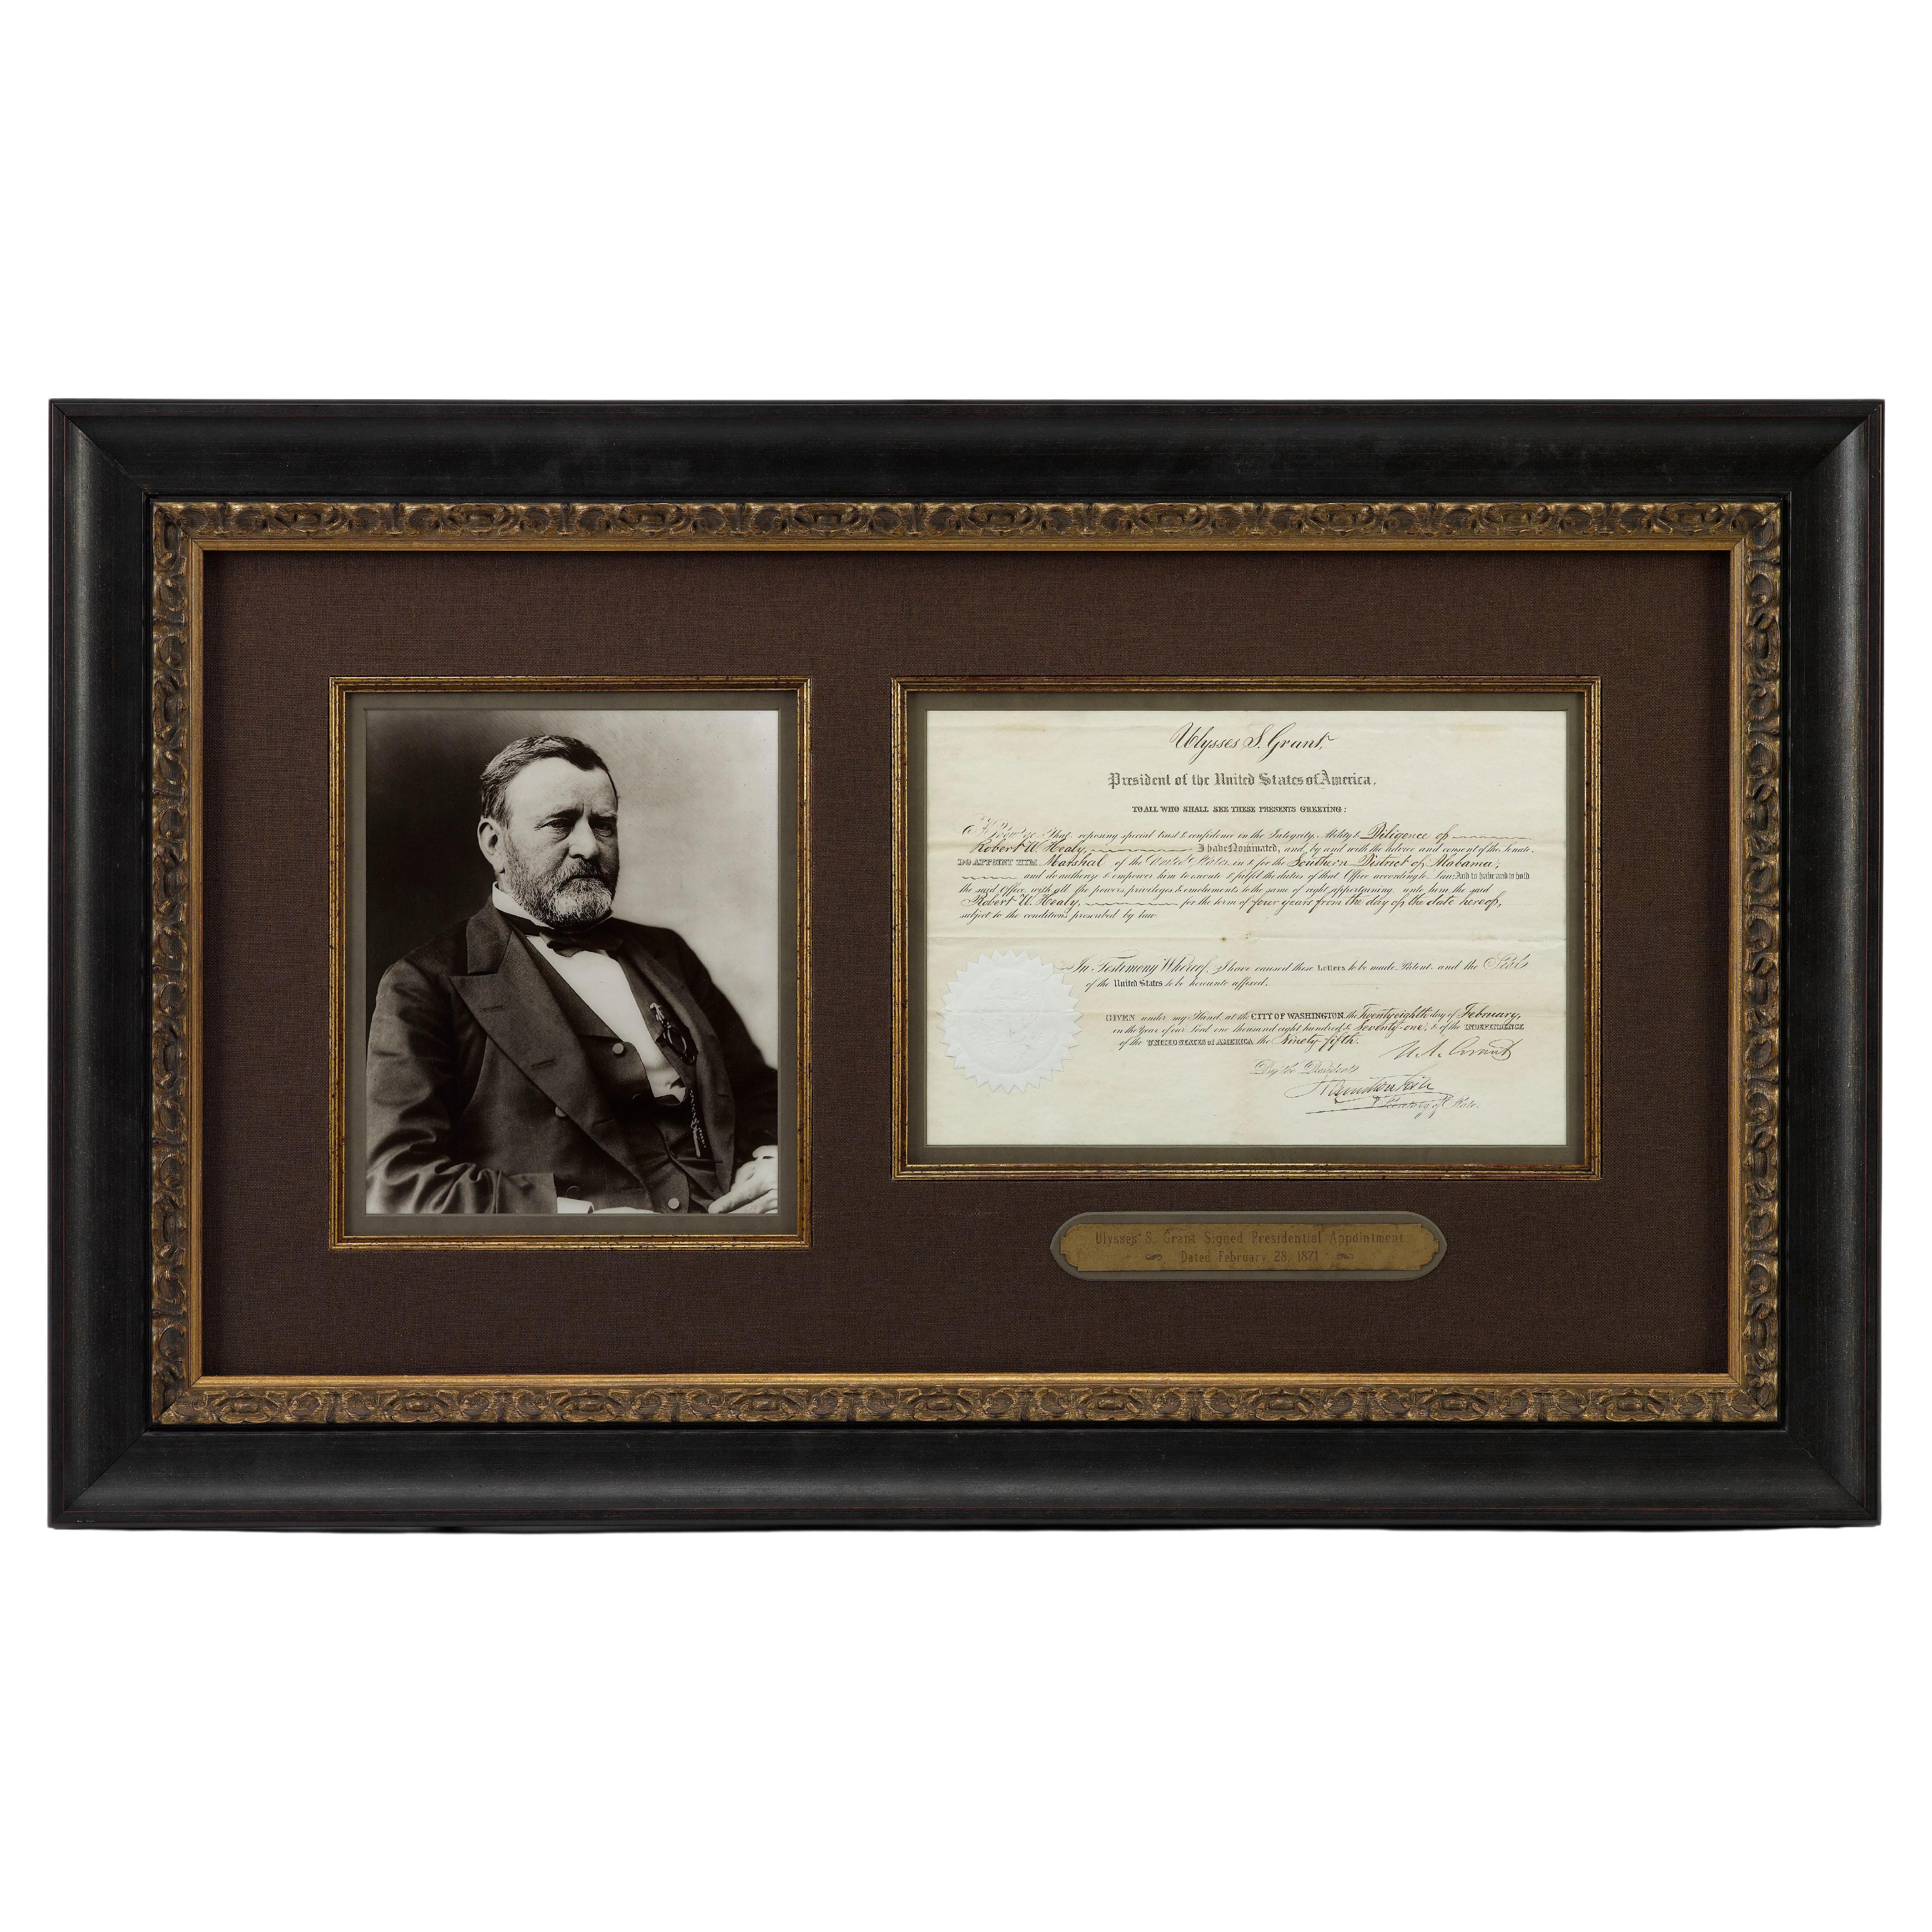 Presented is an original Ulysses S. Grant signed Presidential Appointment, dating to February 28, 1871. Signed during the first term of Grant's presidency, the document appoints 